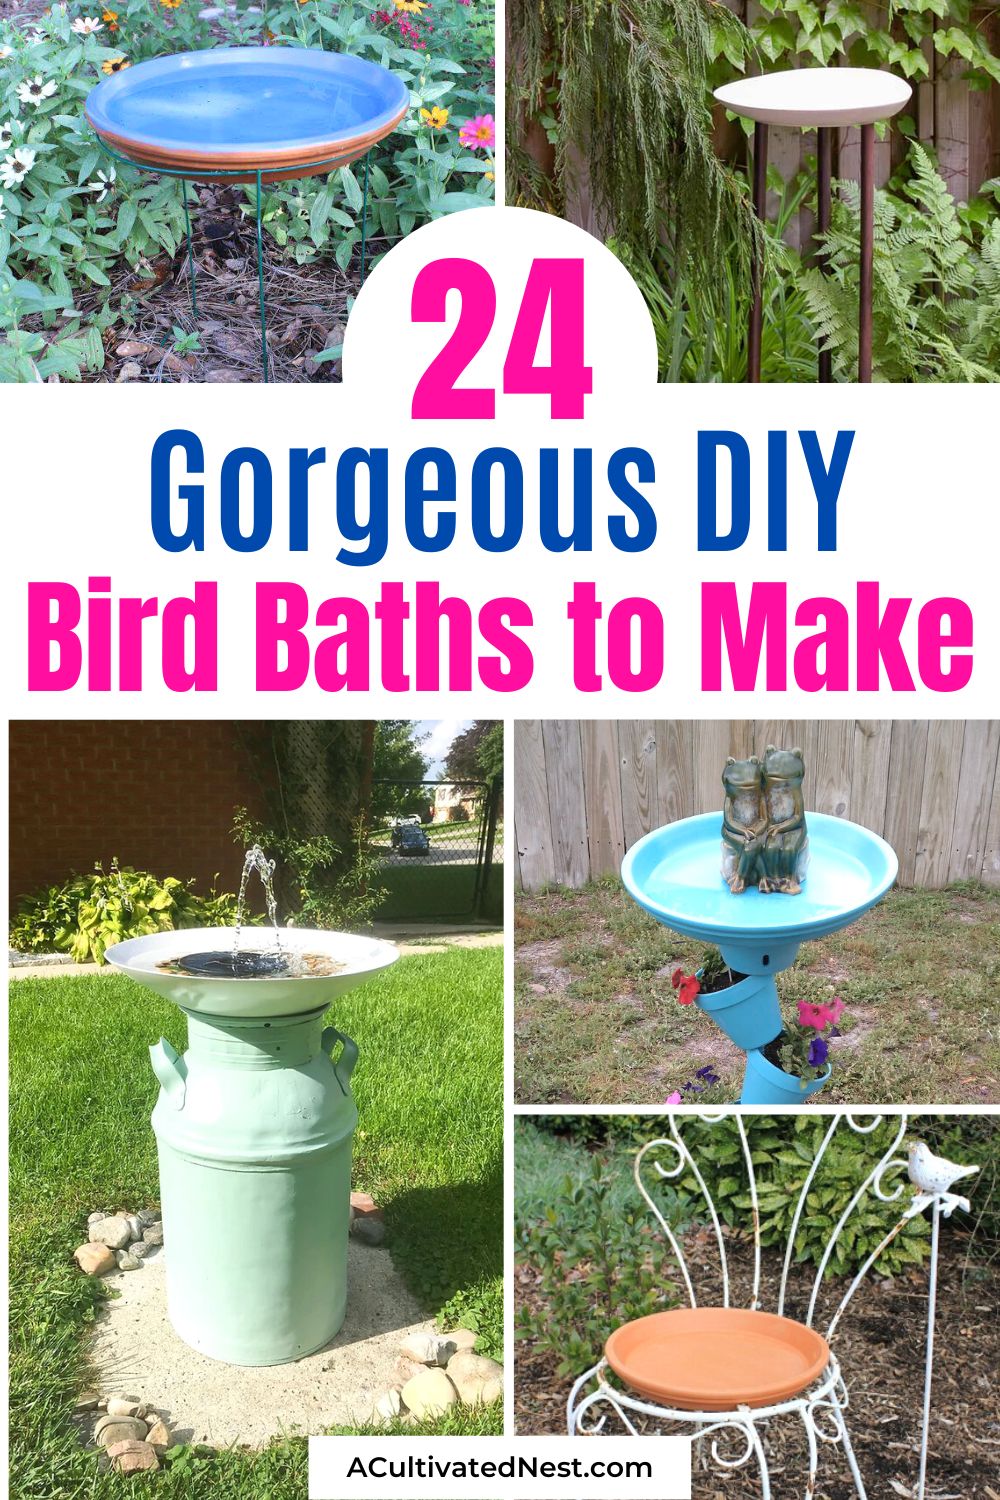 24 Beautiful DIY Bird Baths- If you want an enjoyable way to spruce up your backyard and give your feathered friends a treat, then you should consider making a beautiful DIY bird bath! | #birdBath #yardDIY #diyProjects #gardenDecor #ACultivatedNest